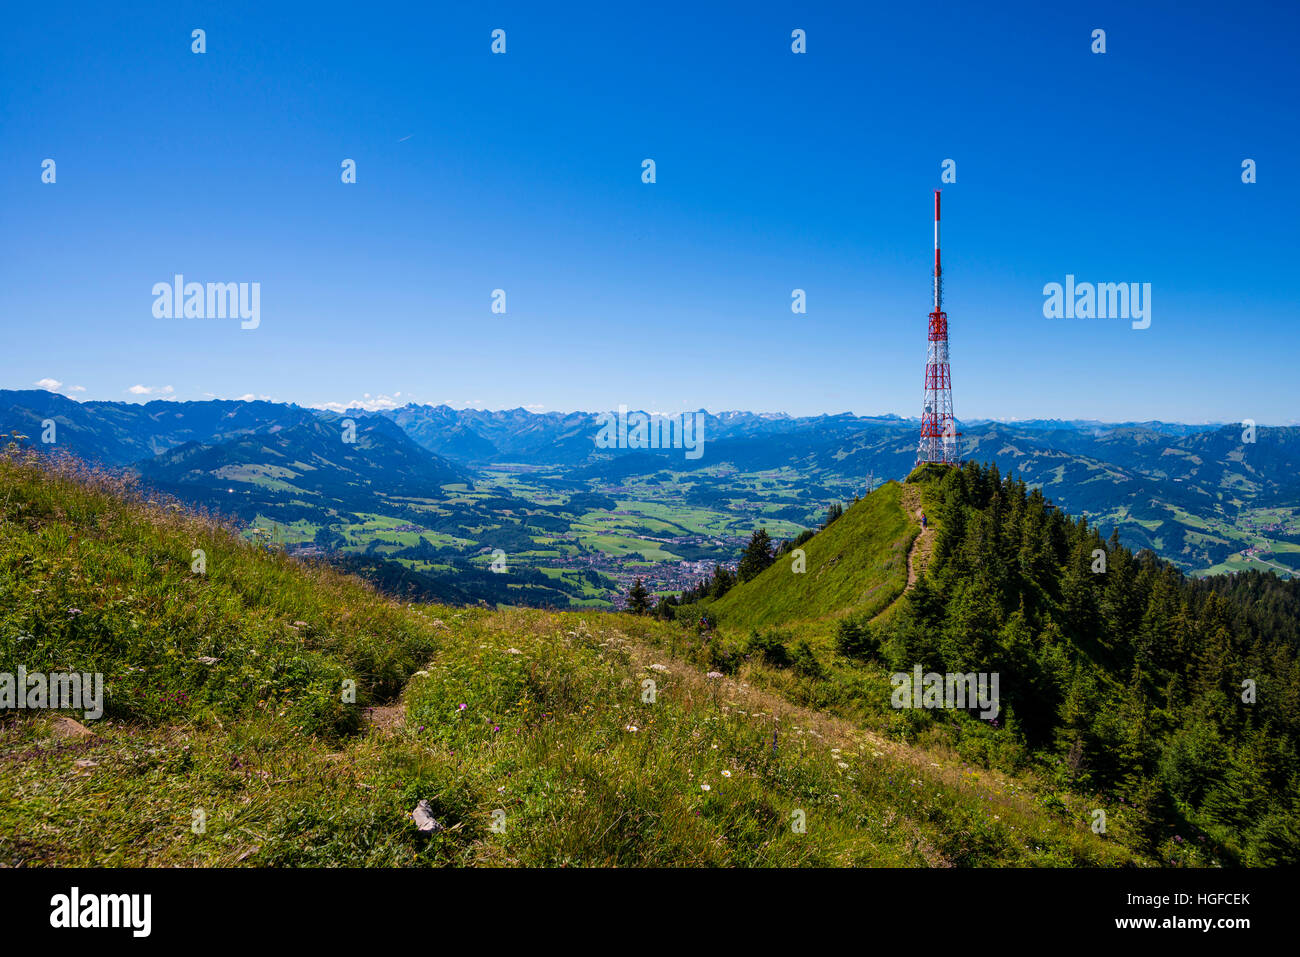 Broadcasting tower in Bavaria Stock Photo